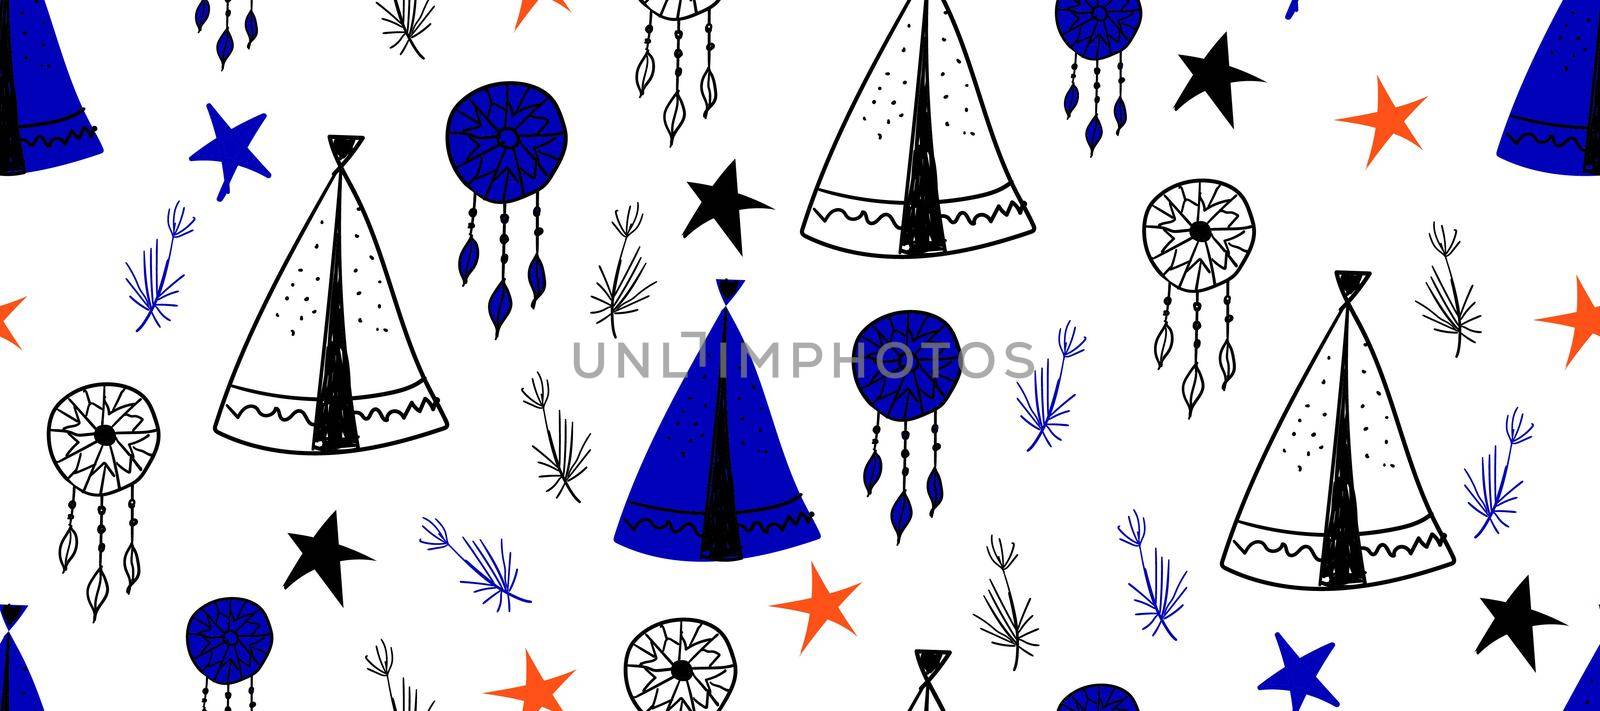 Seamless pattern in Scandinavian style for children .. Cute cartoon trees and tents on a blue background. Wigwam for the Indians. Drawings for boys. by annatarankova